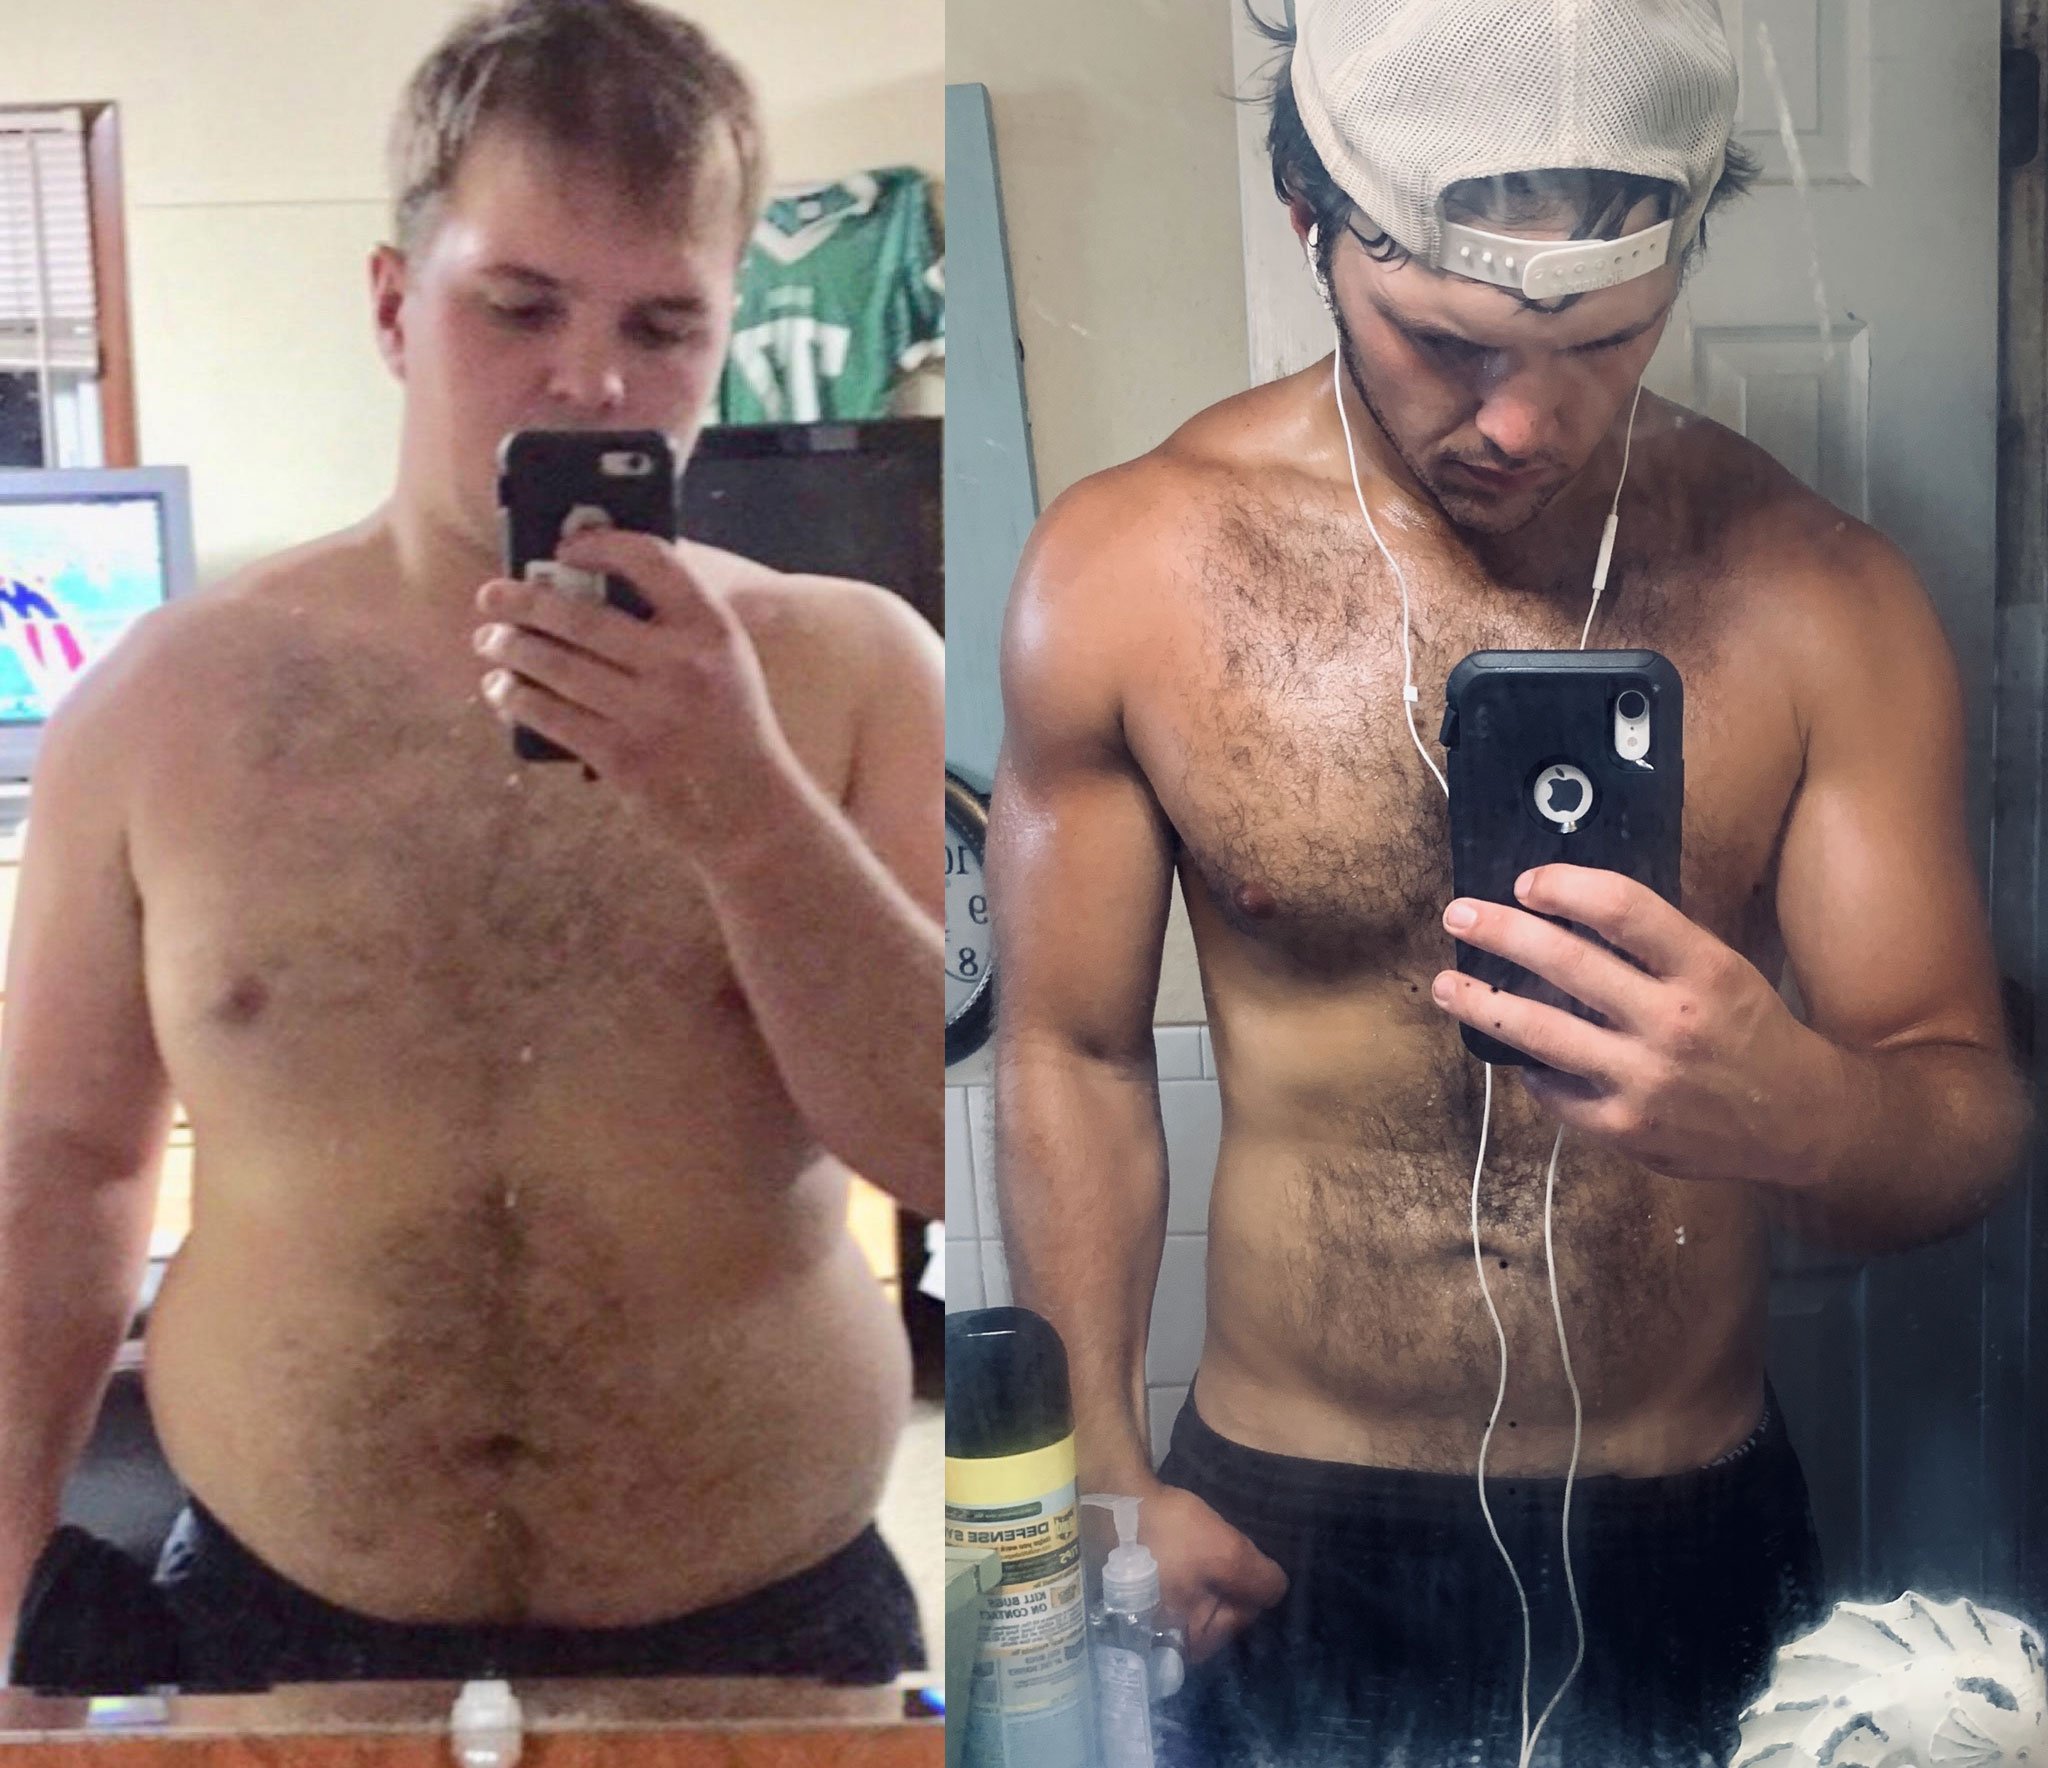 2 Years of Intermittent Fasting and Weight Lifting  Mr. Fasting